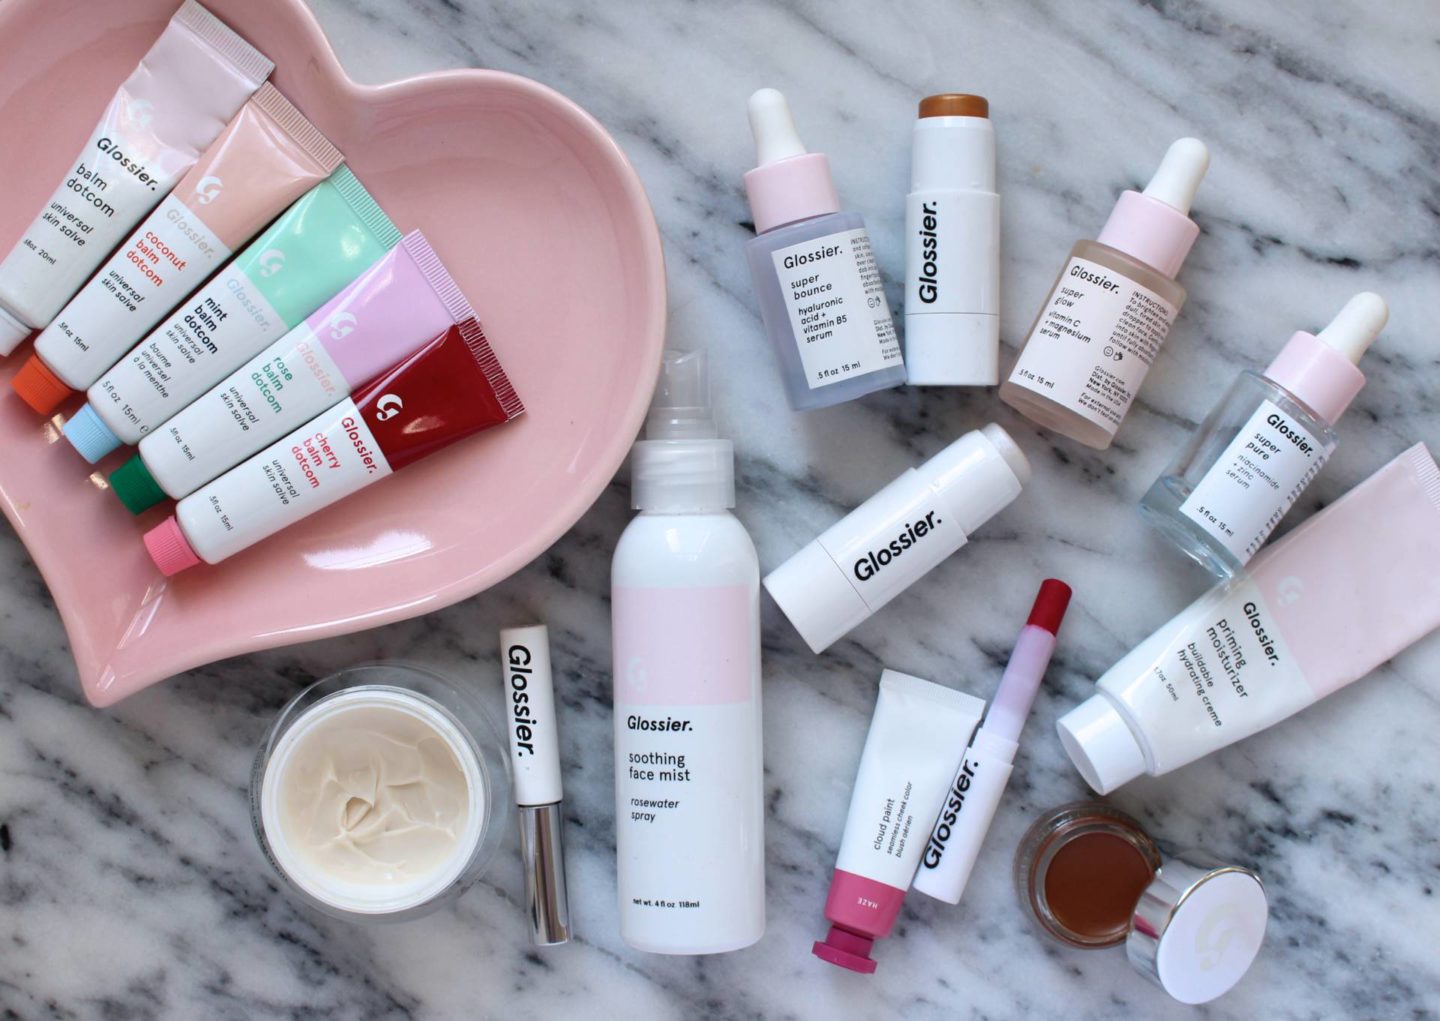 Glossier Makes its way to the UK; 6 must have Glossier products